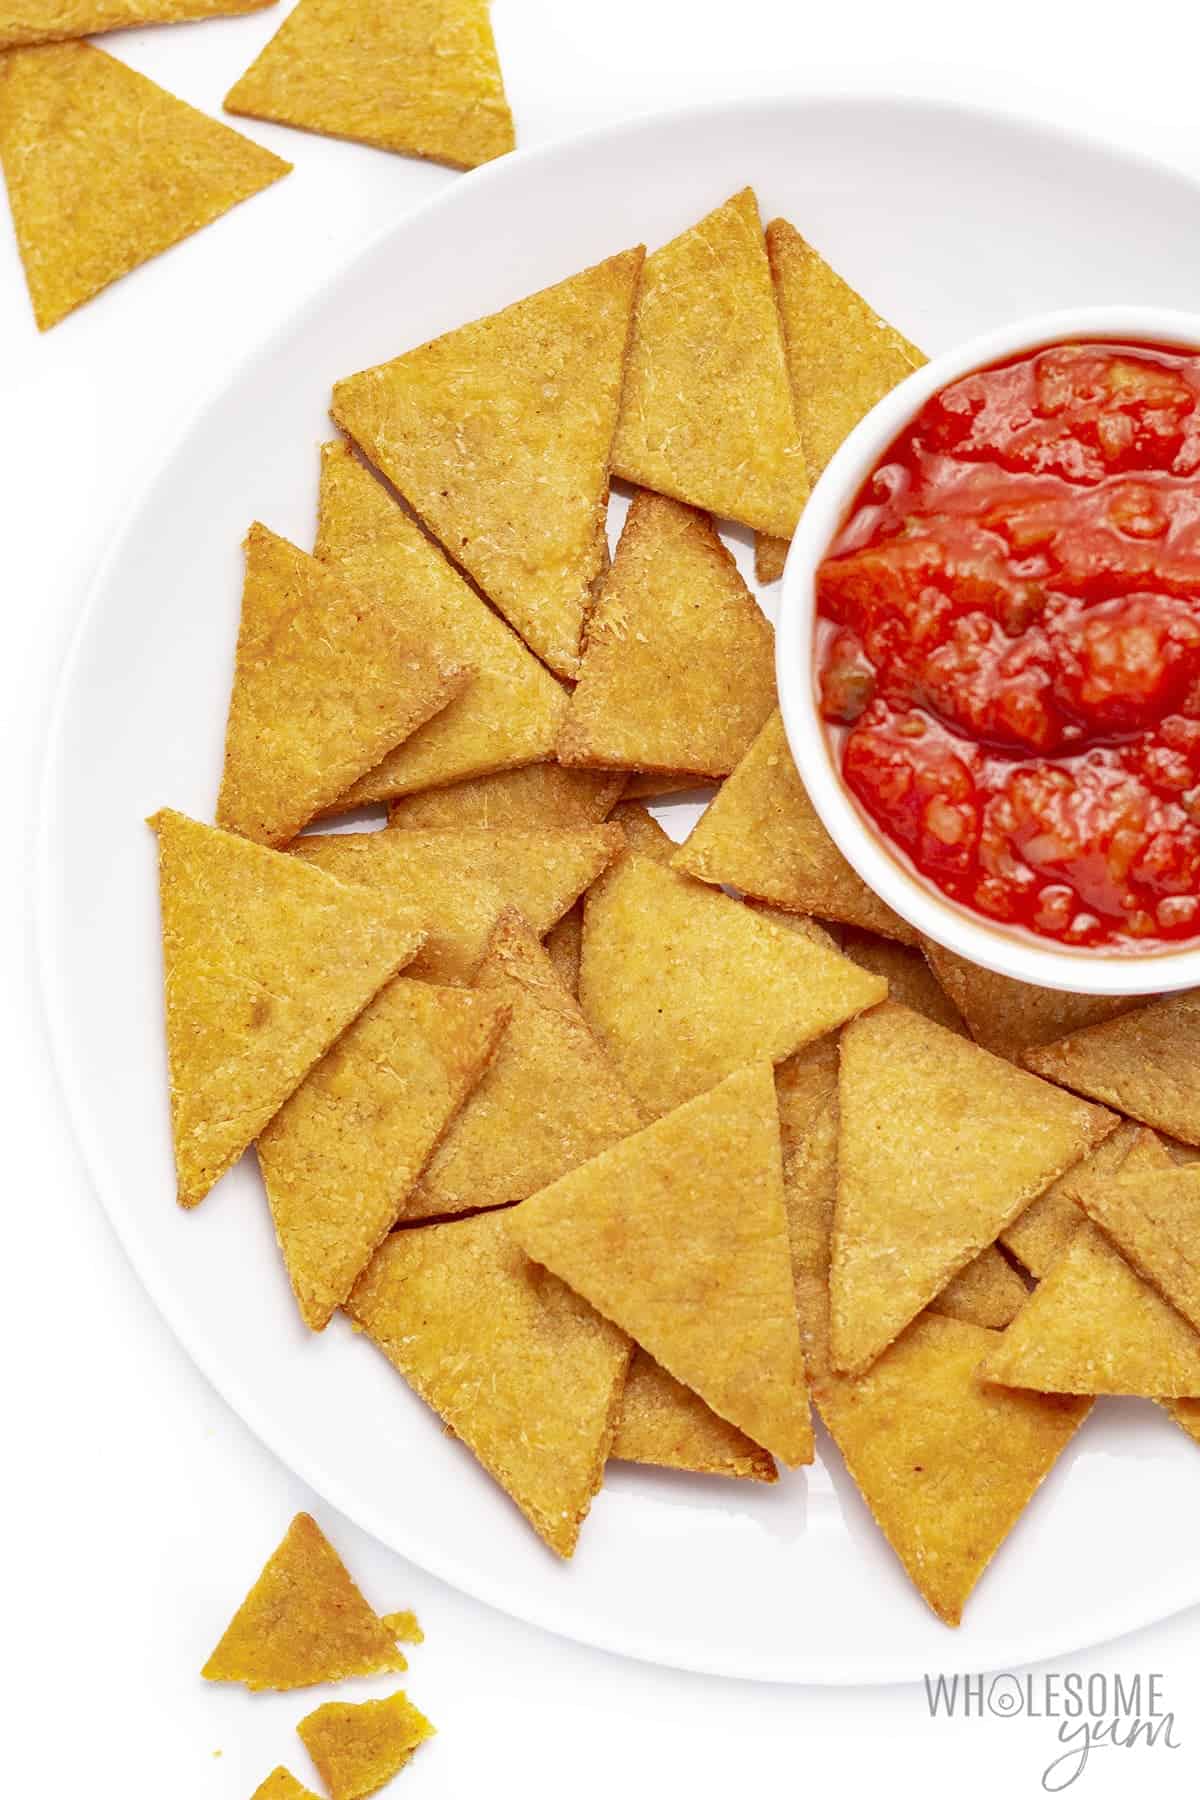 Low carb chips on a plate next to bowl of salsa.